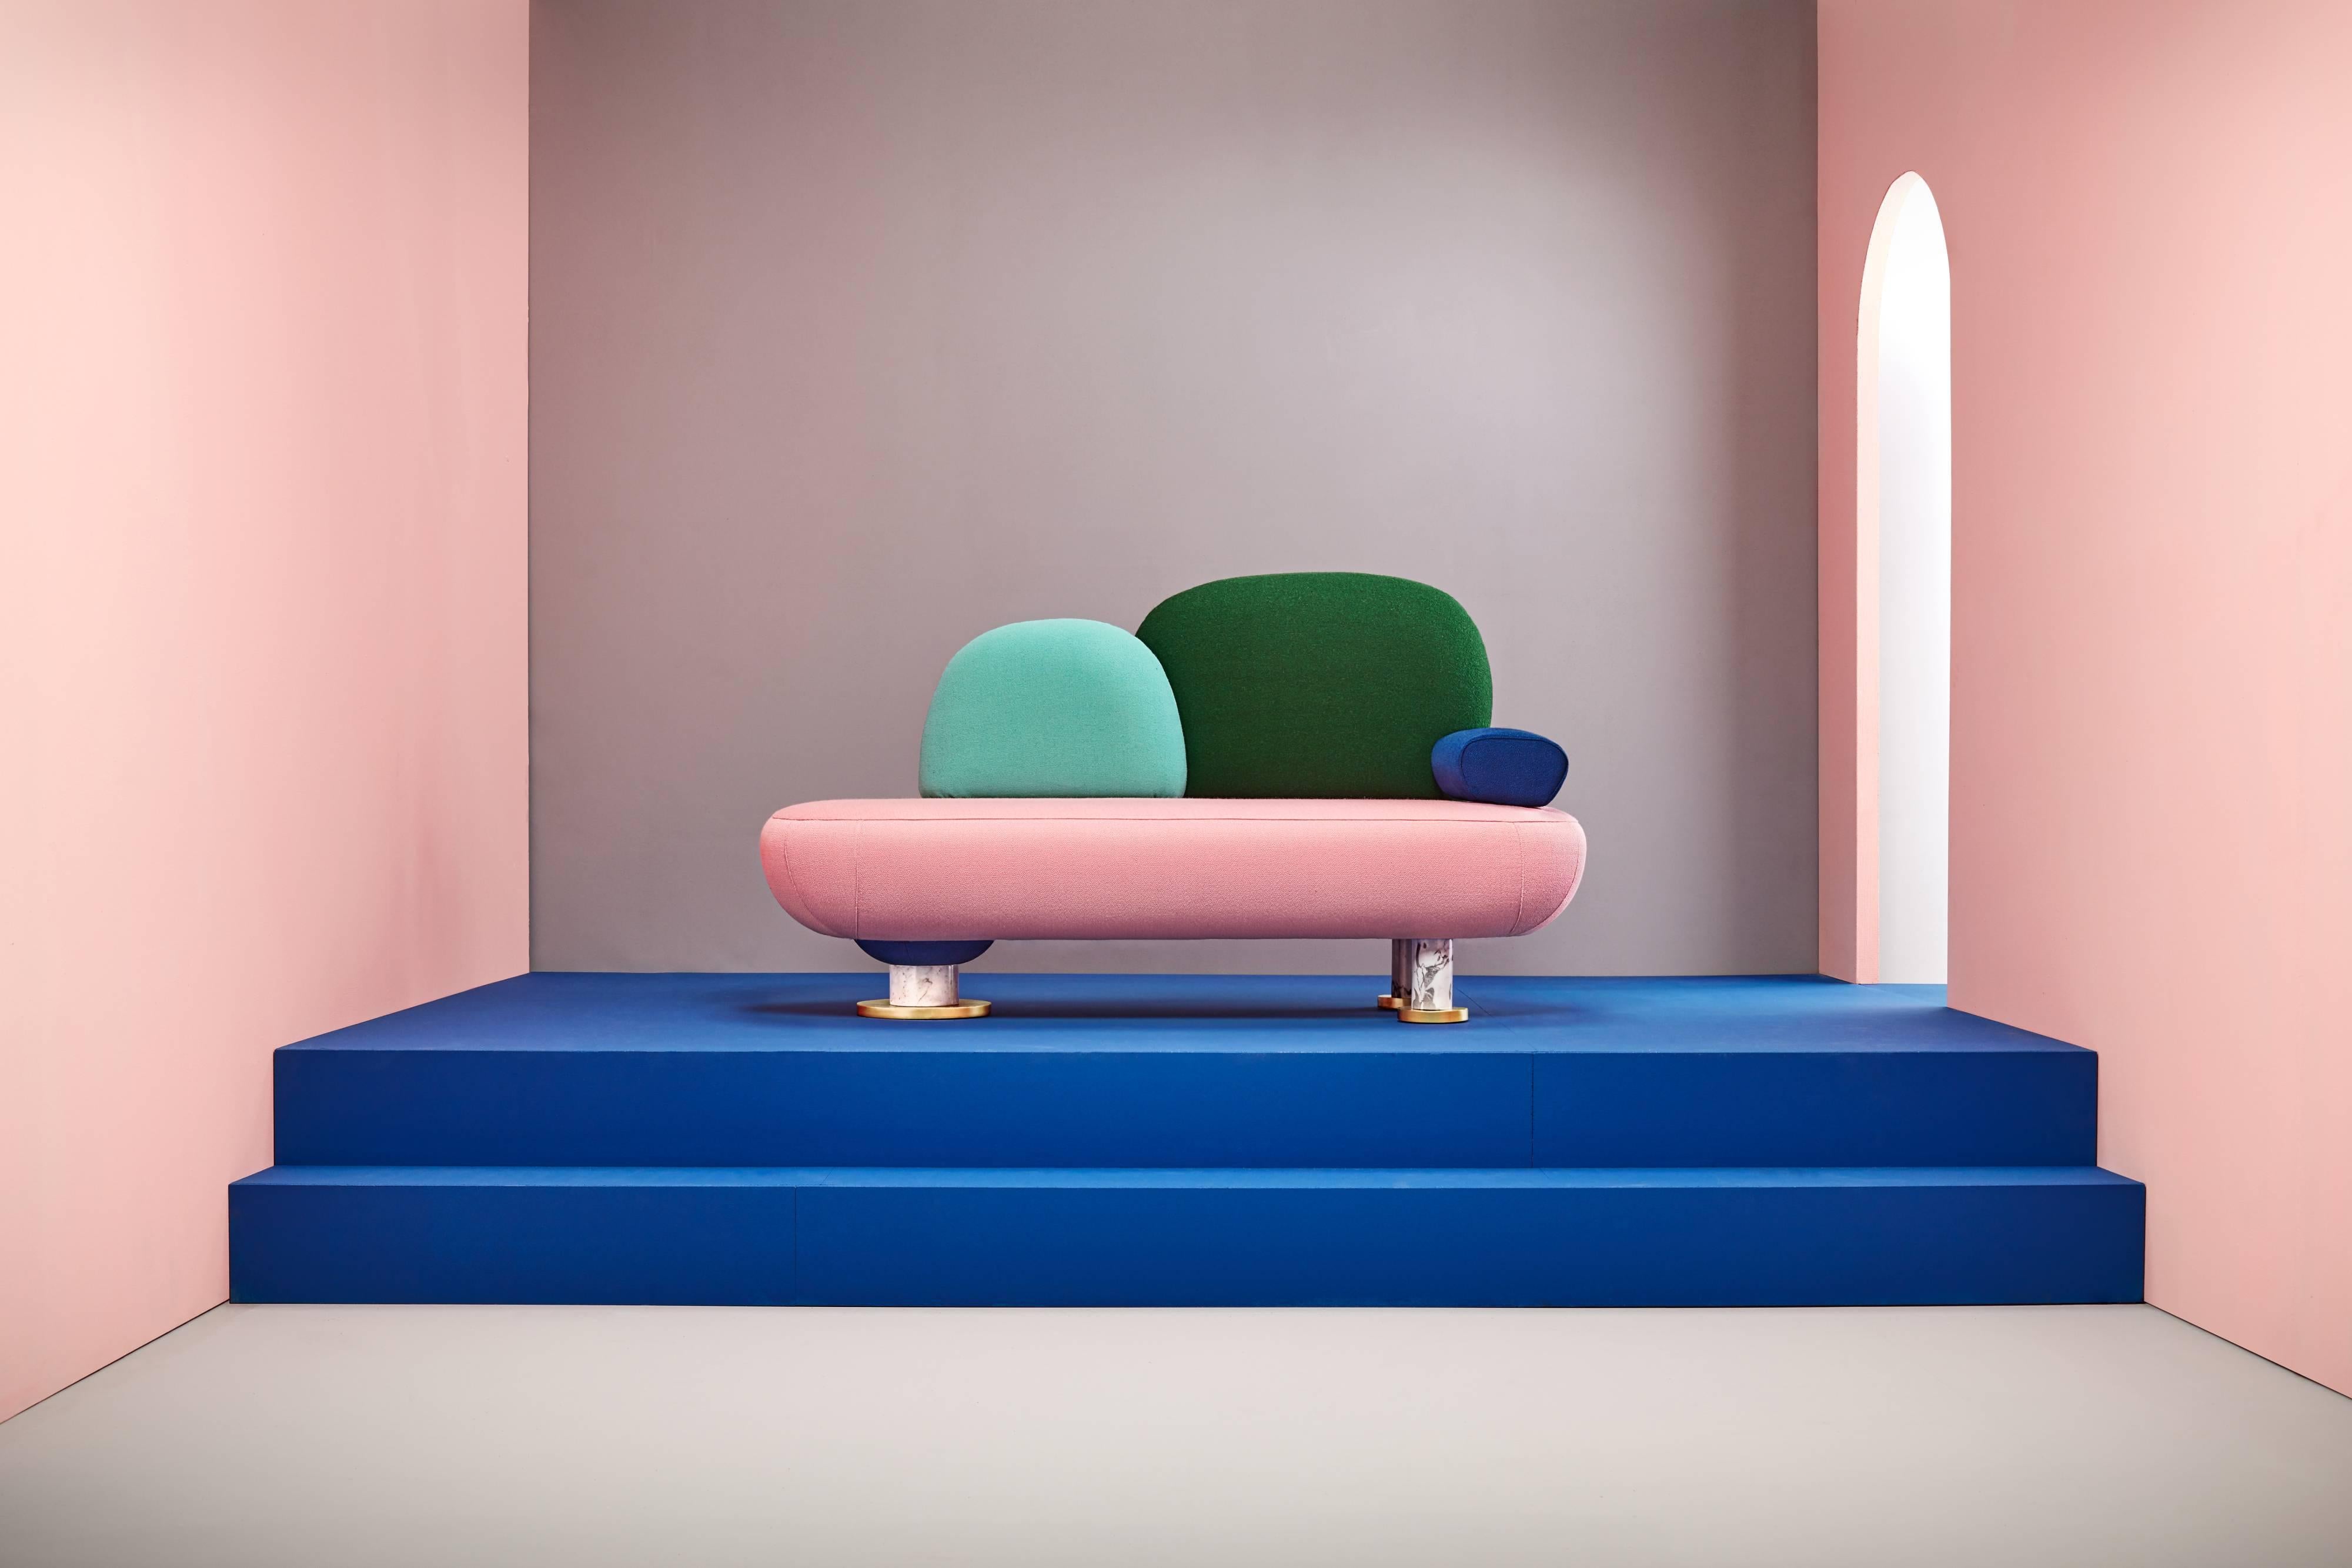 Toadstool Collection, sofa by Pepe Albargues
Dimensions and materials:
Dimensions: 88 x 160 x 75 cm
Materials: Beech, pine, and particles board wooden frame.
Fiber-coated polyurethane 3542 seats. Fiberglass coated, HR22